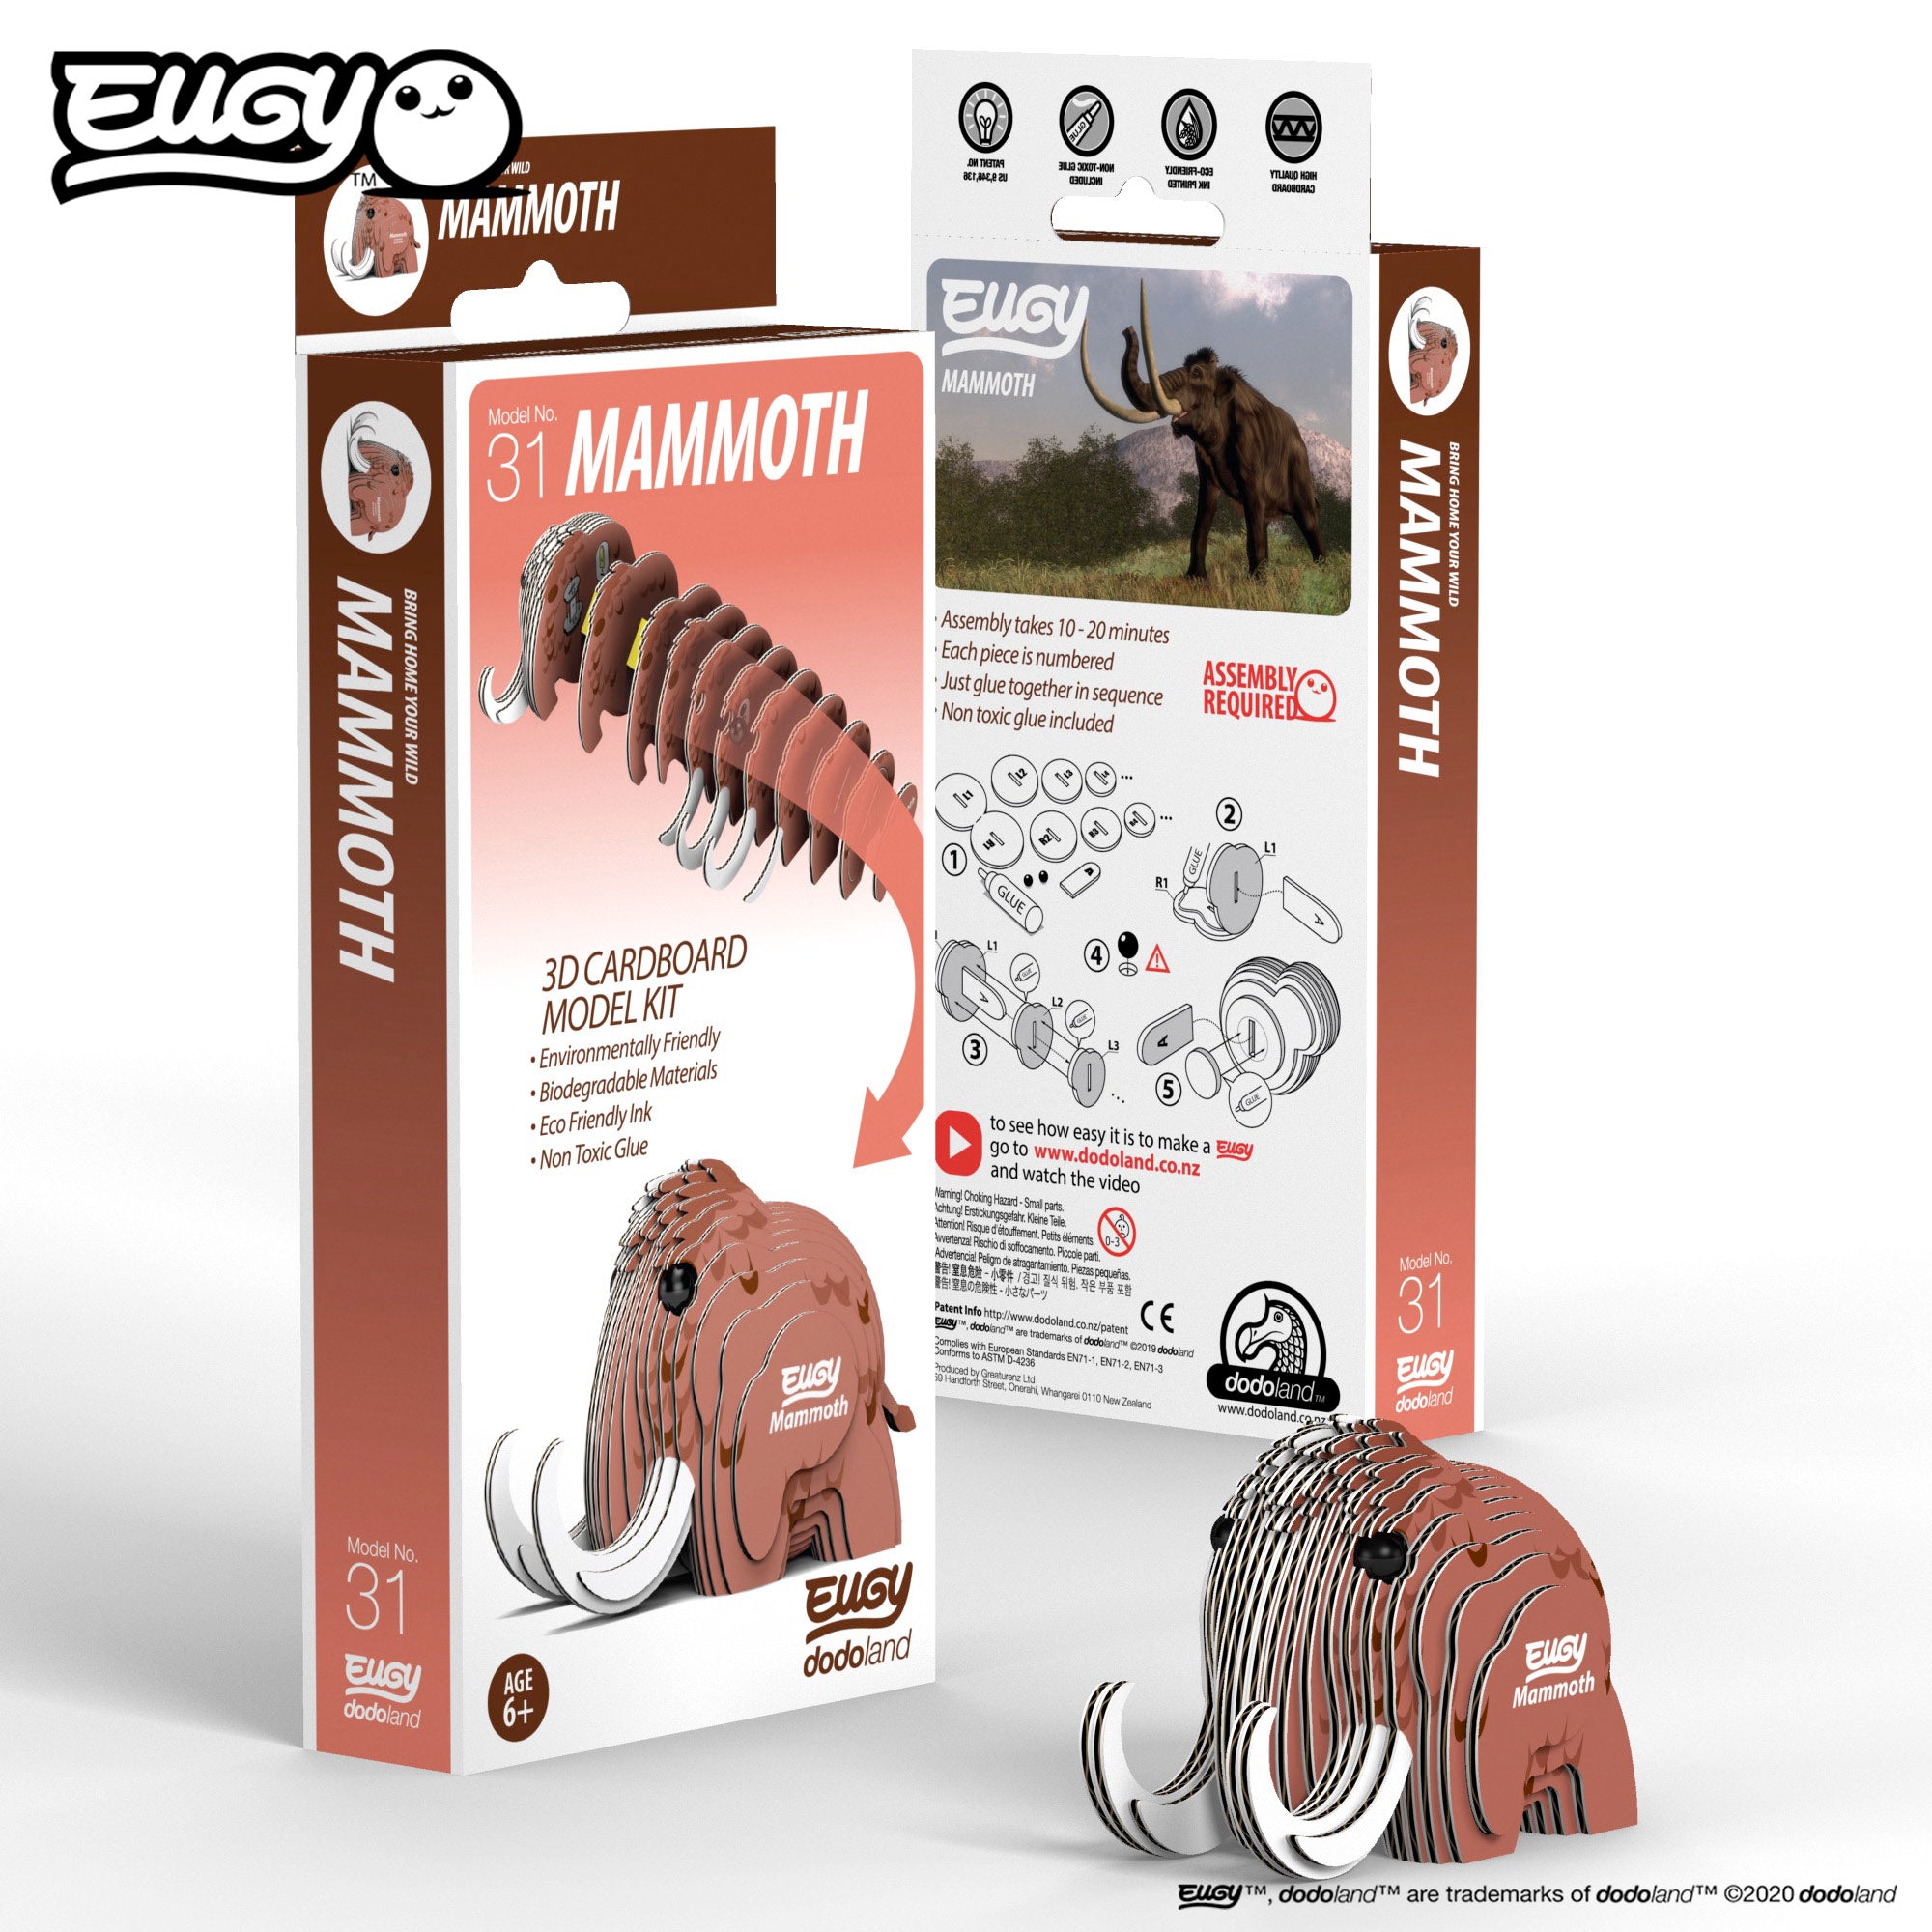 Image of an EUGY Mammoth, looking left in front two EUGY Kangaroo Boxes, 1 showing the front cover and the other showing the rear of the box, against a white background